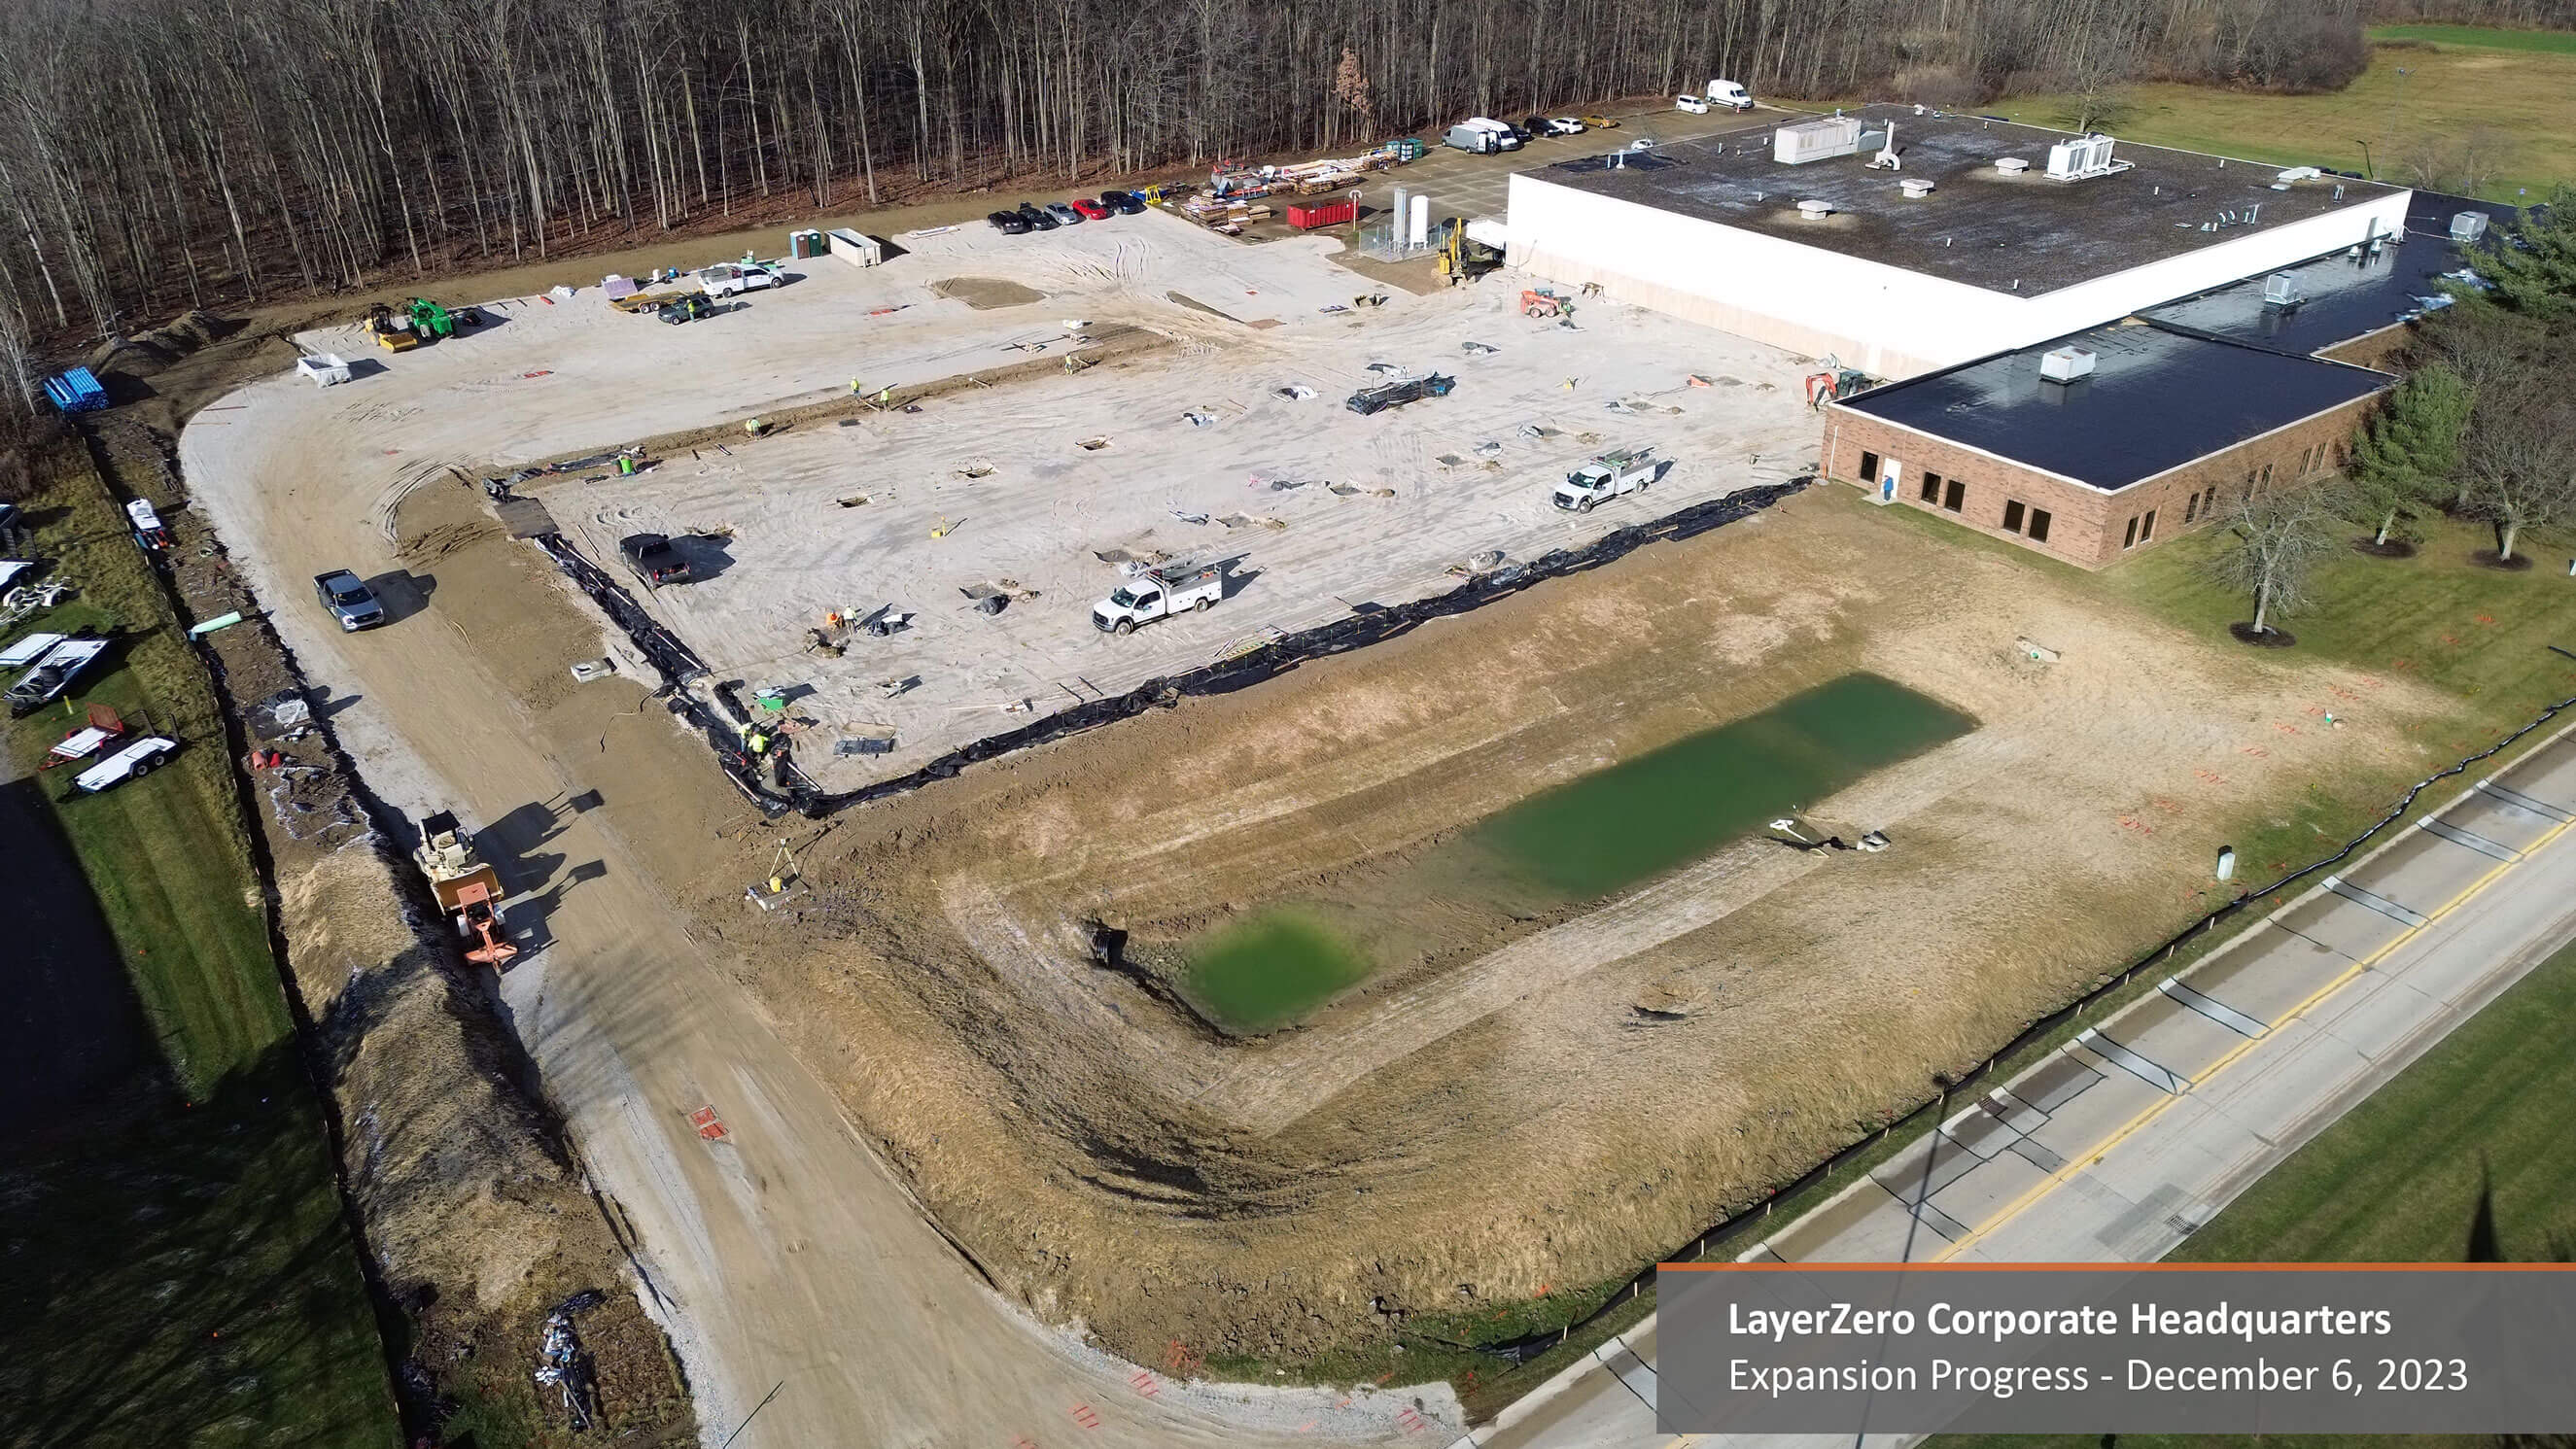 Looking toward the LayerZero headquarters Expansion Project